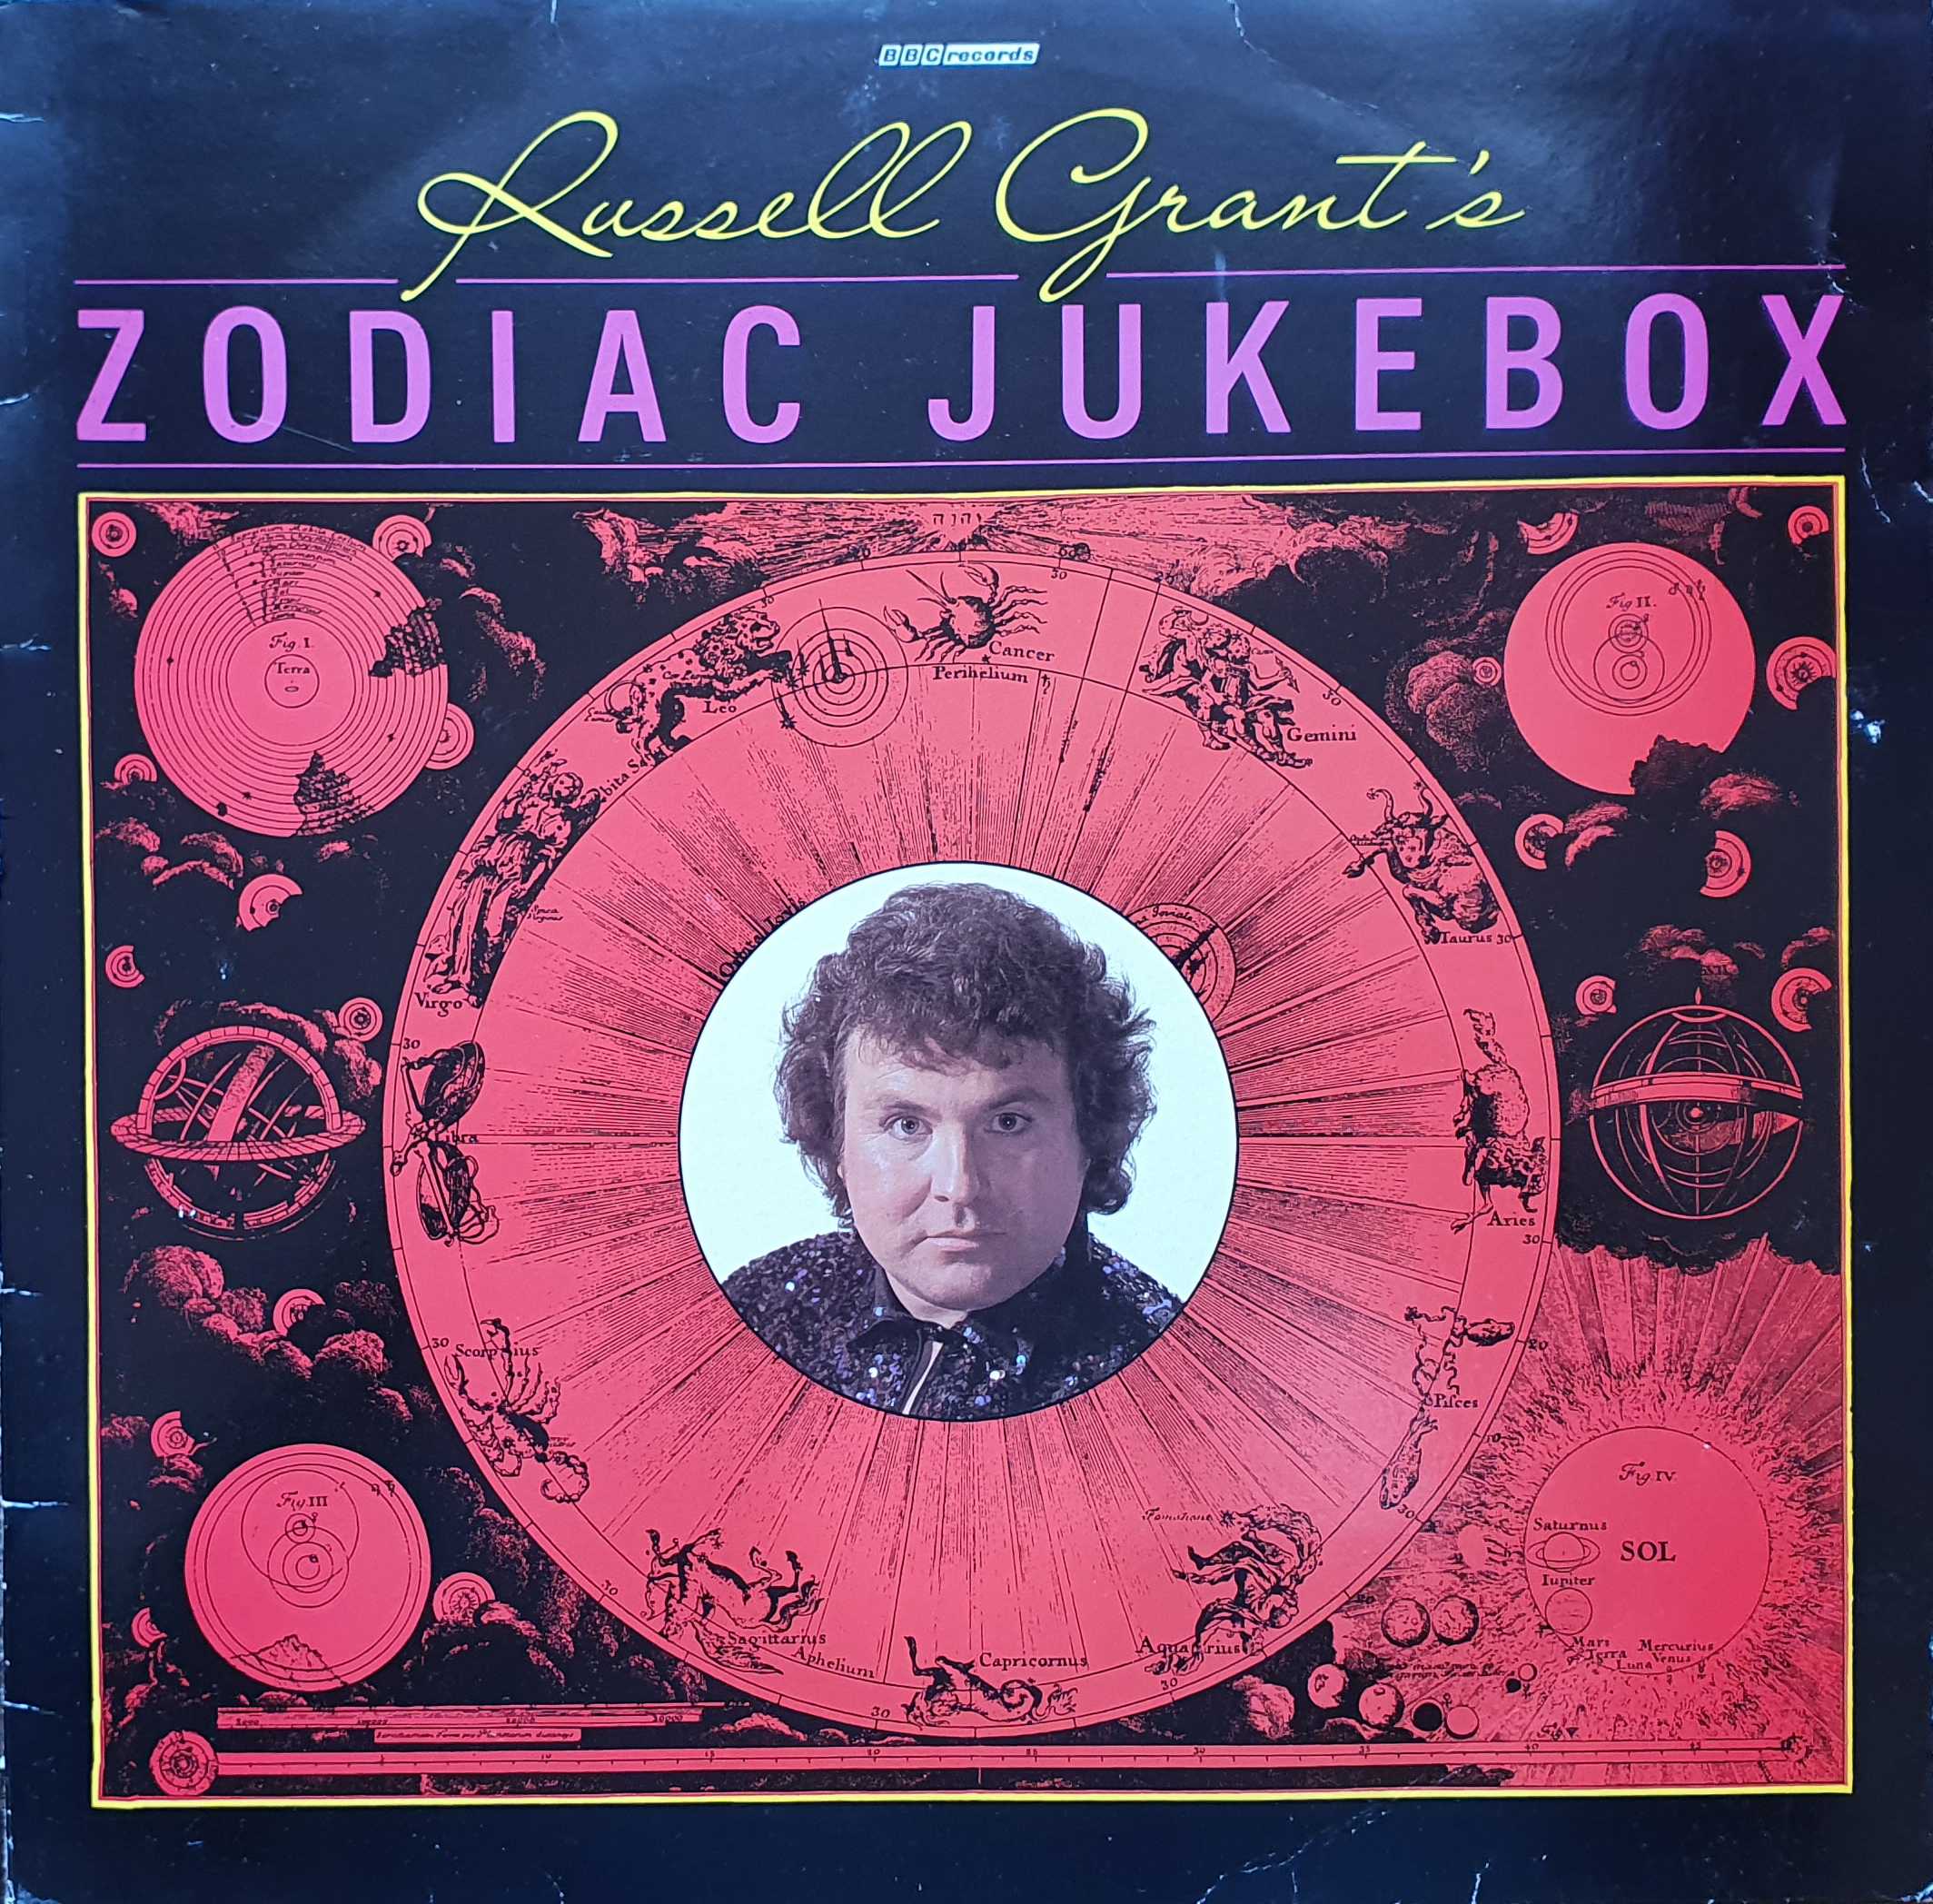 Picture of REH 491 Zodiac jukebox by artist Russell Grant from the BBC albums - Records and Tapes library